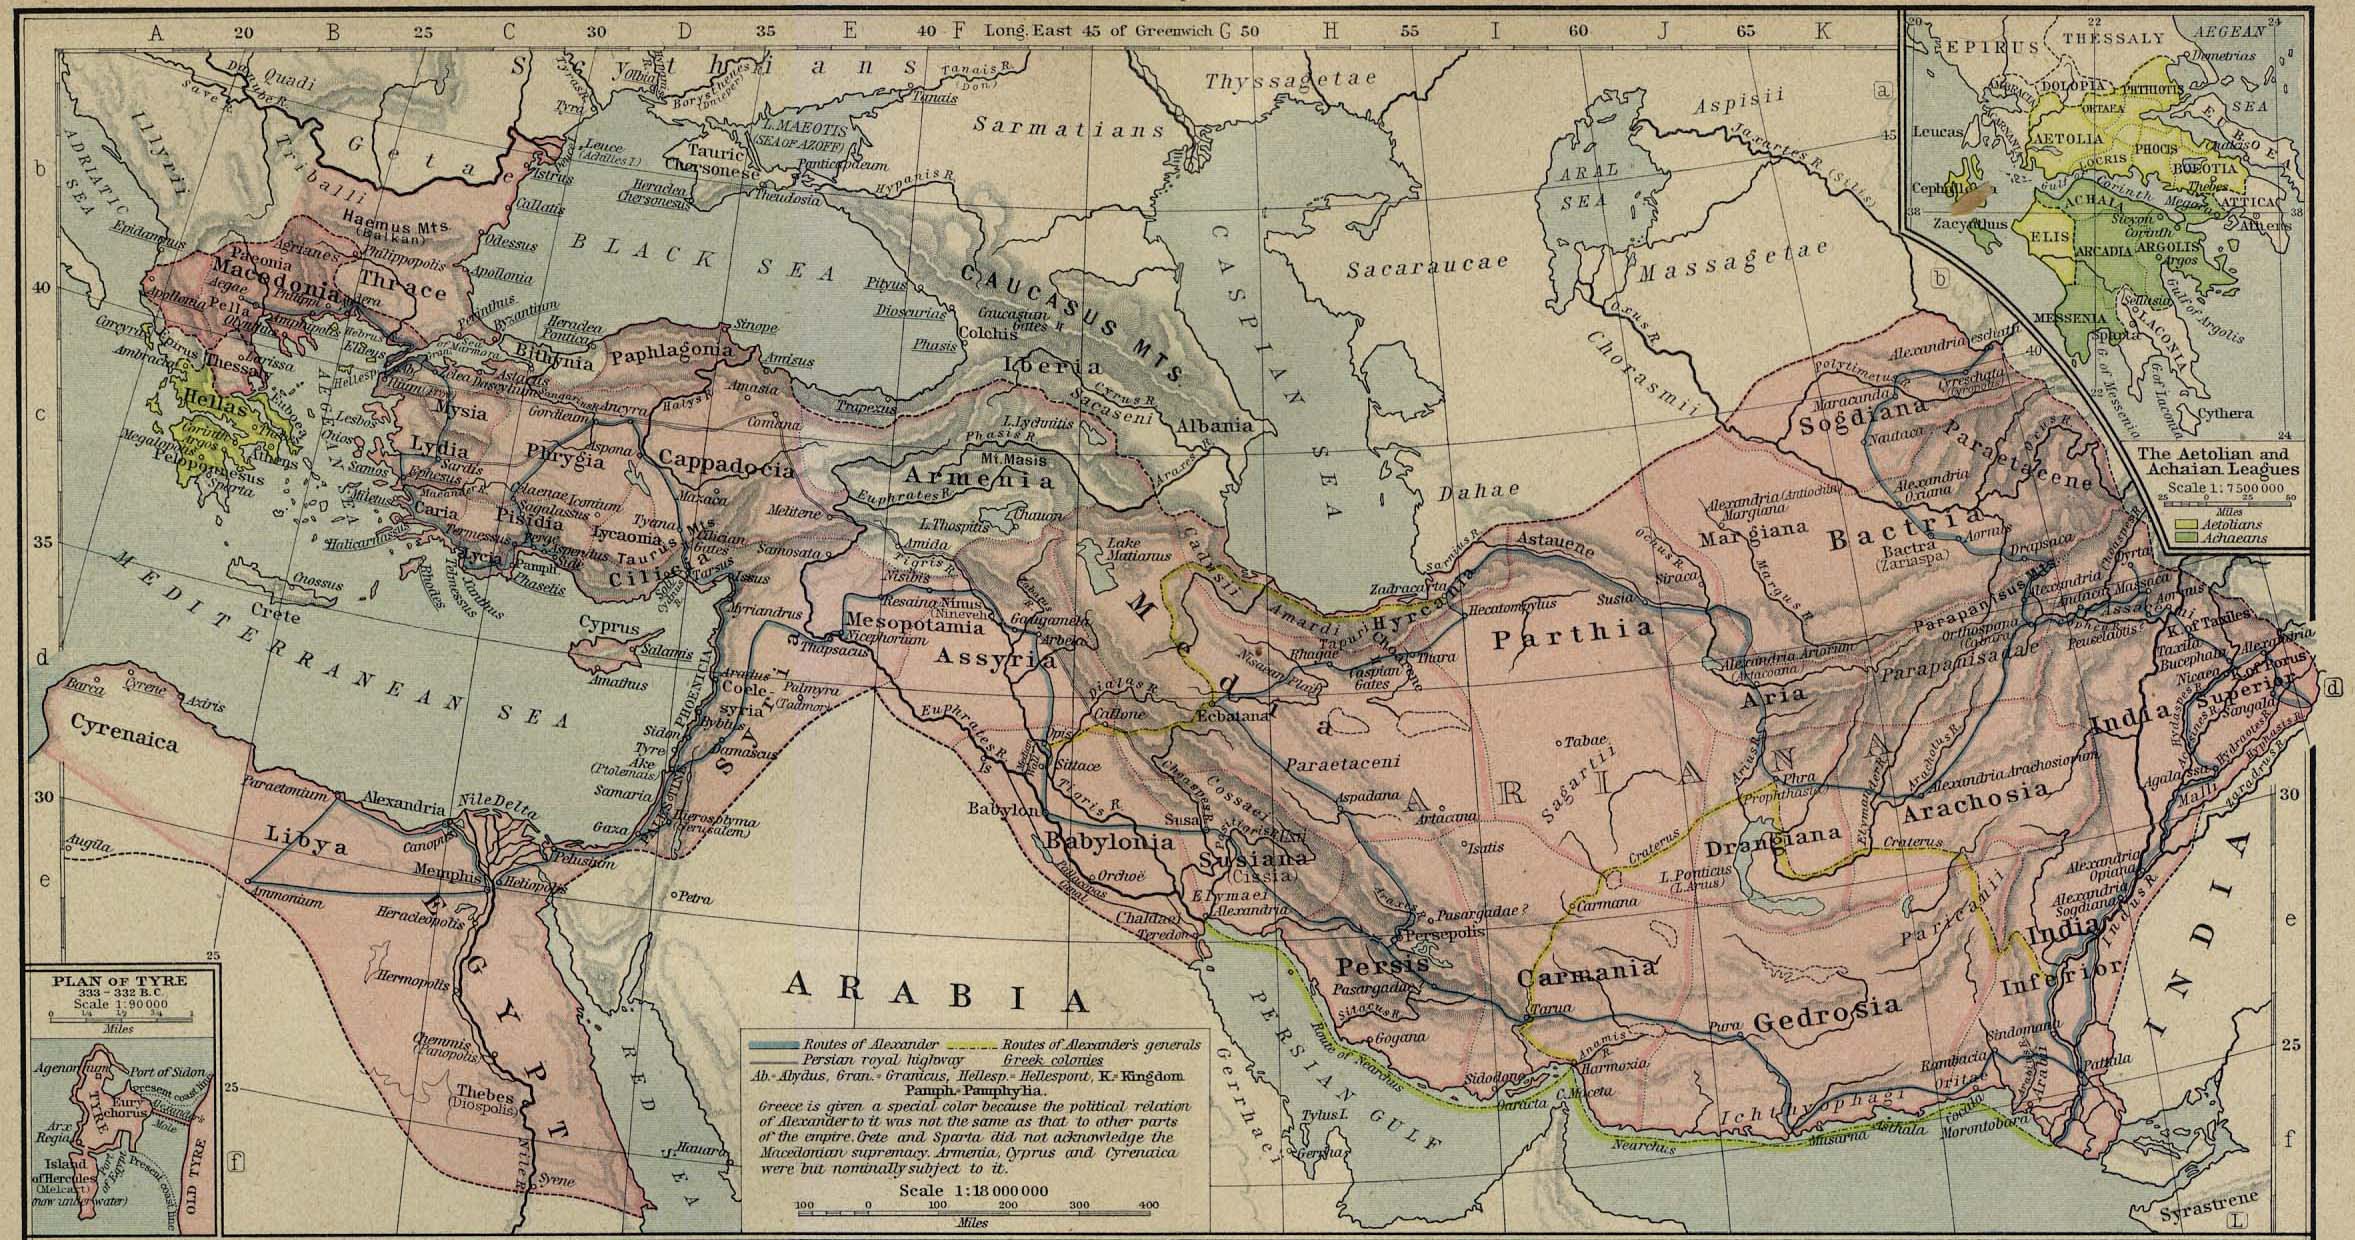 Map of Kingdom of Alexander336-323 BCwith inset of Tyre